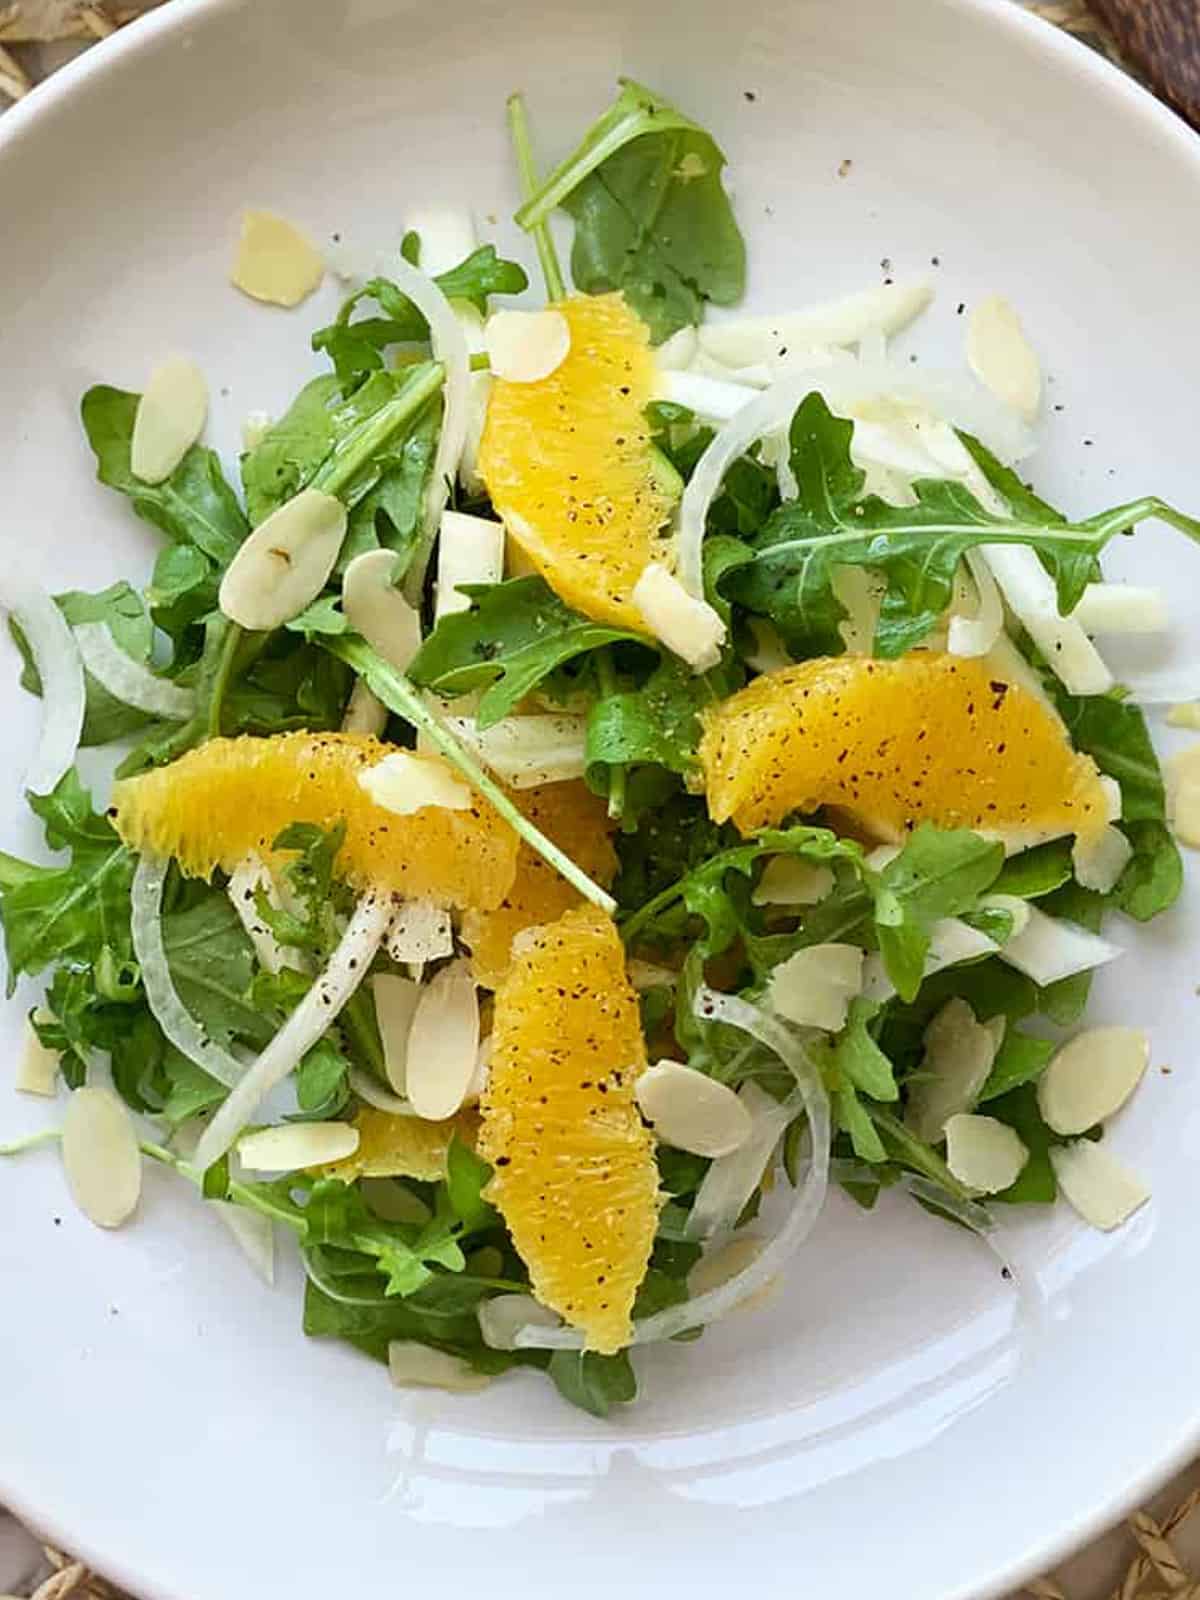 salad of green leaves, orange segments, almonds, sliced fennel and onion